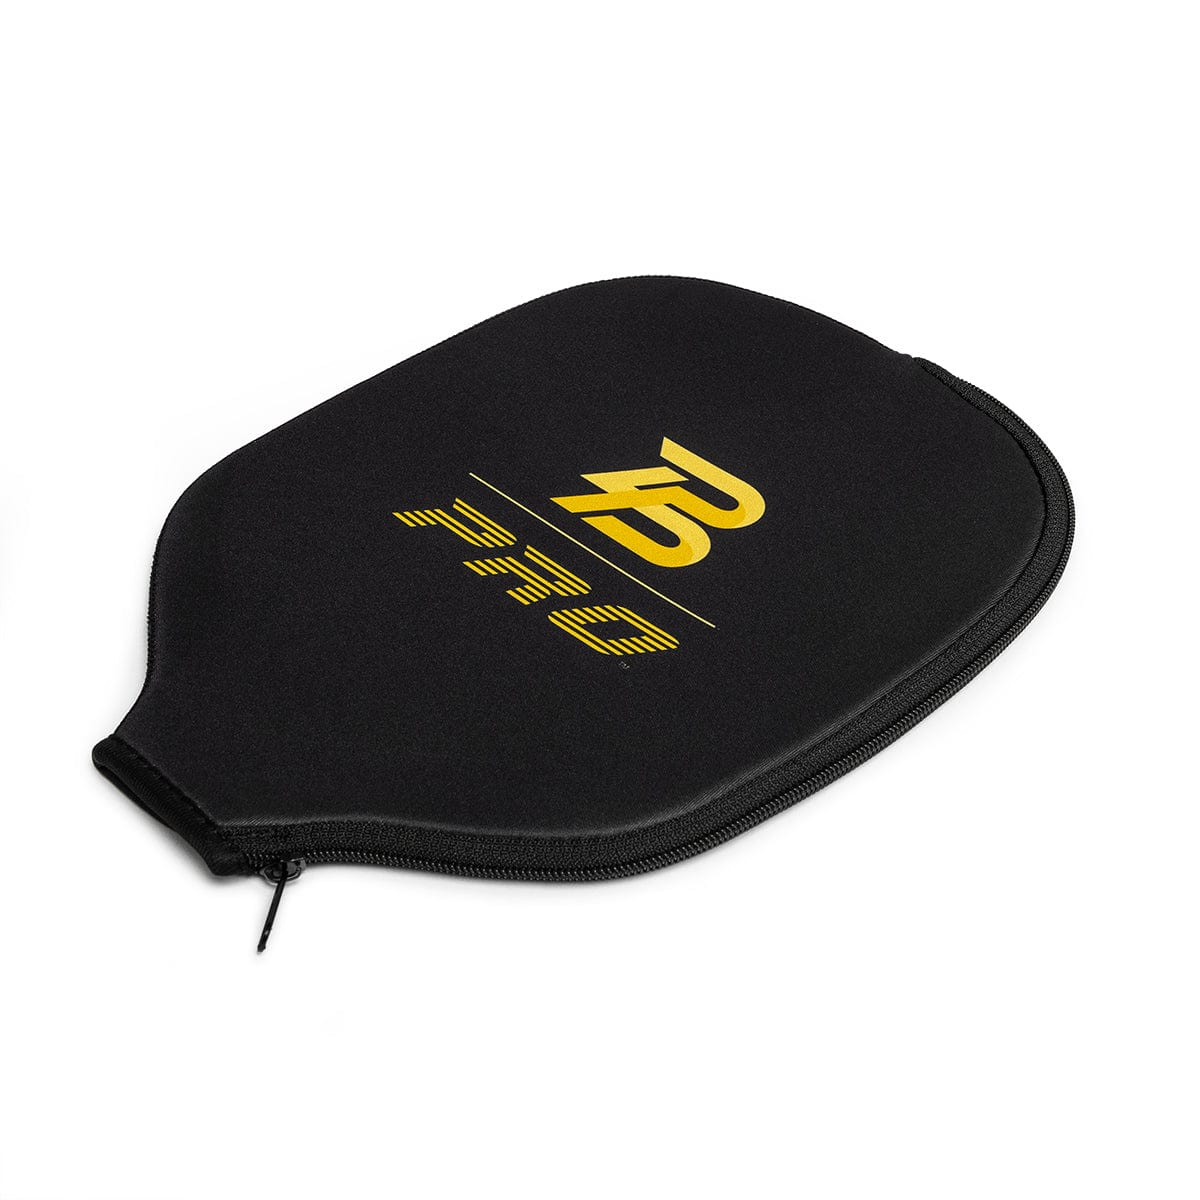 PBPRO Pickleball Covers PBPRO Infinity Paddle Cover